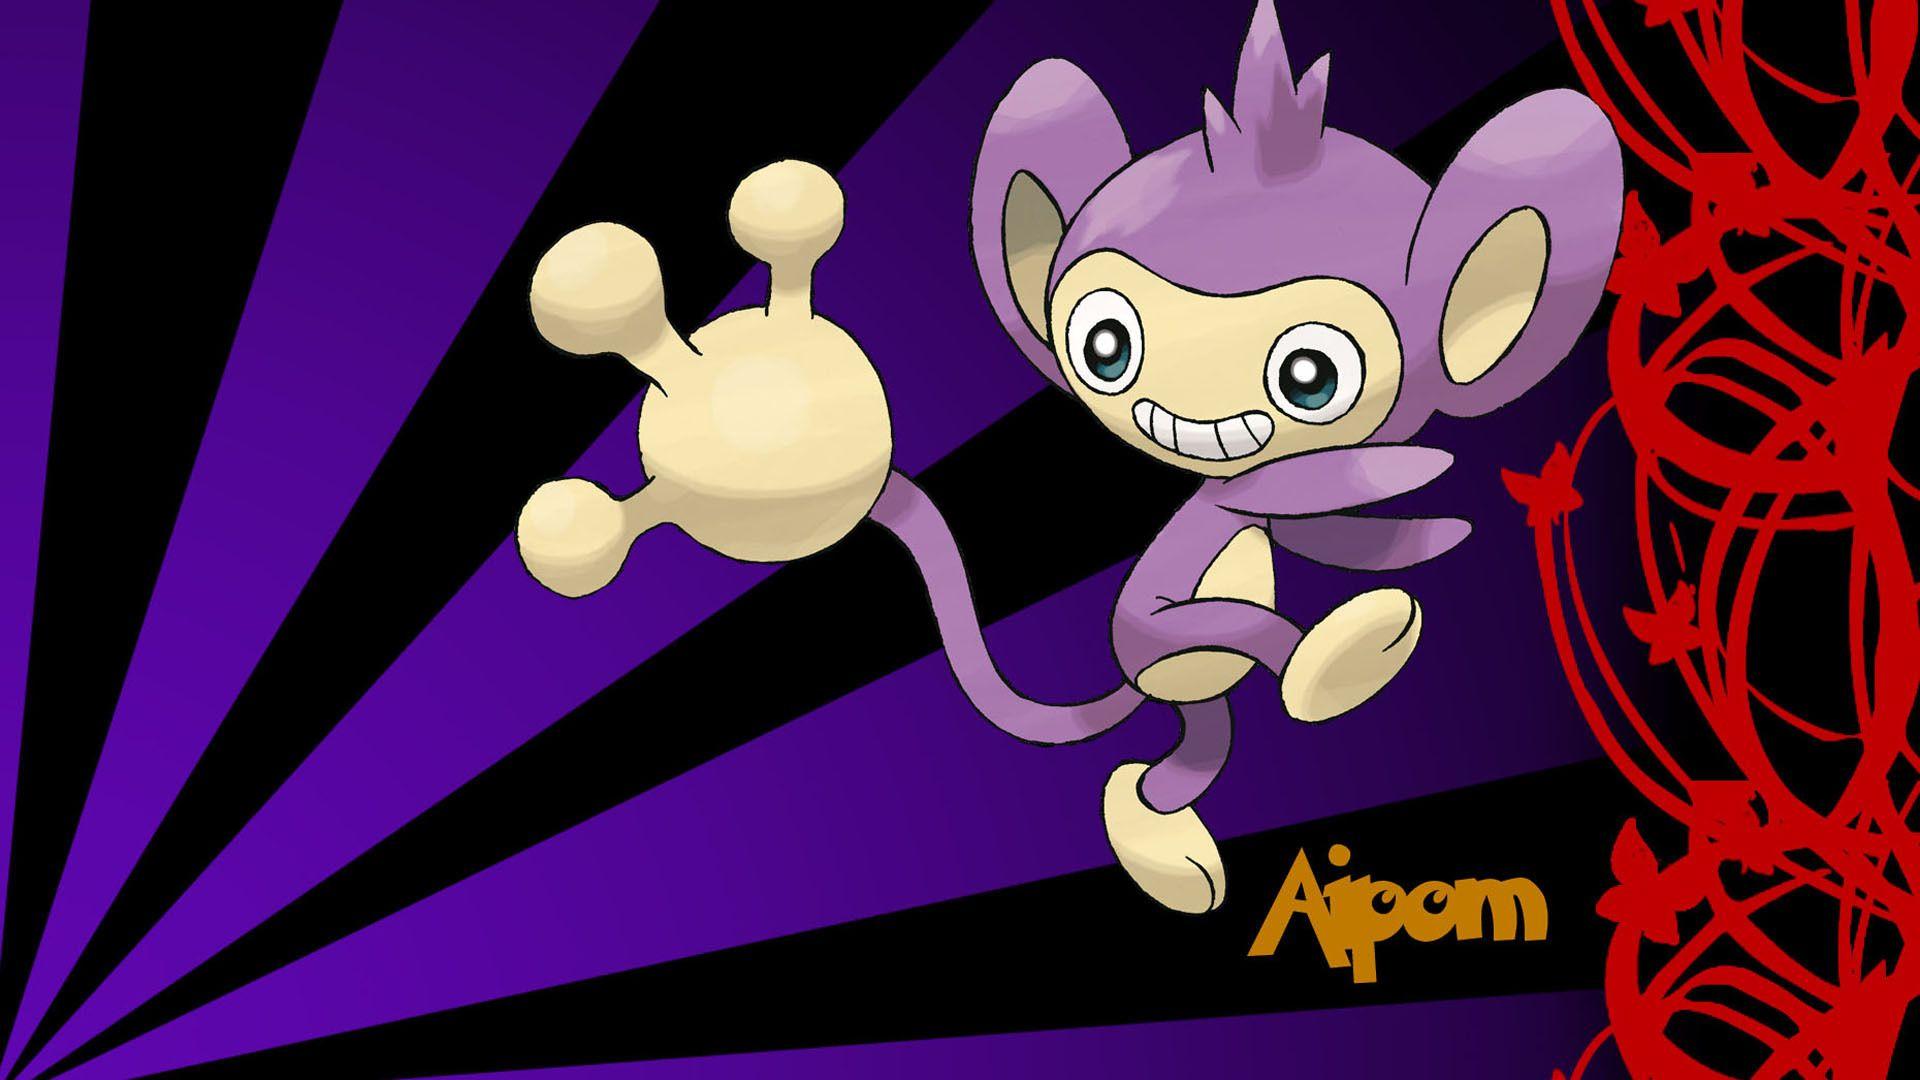 Aipom Wallpaper Image Photo Picture Background